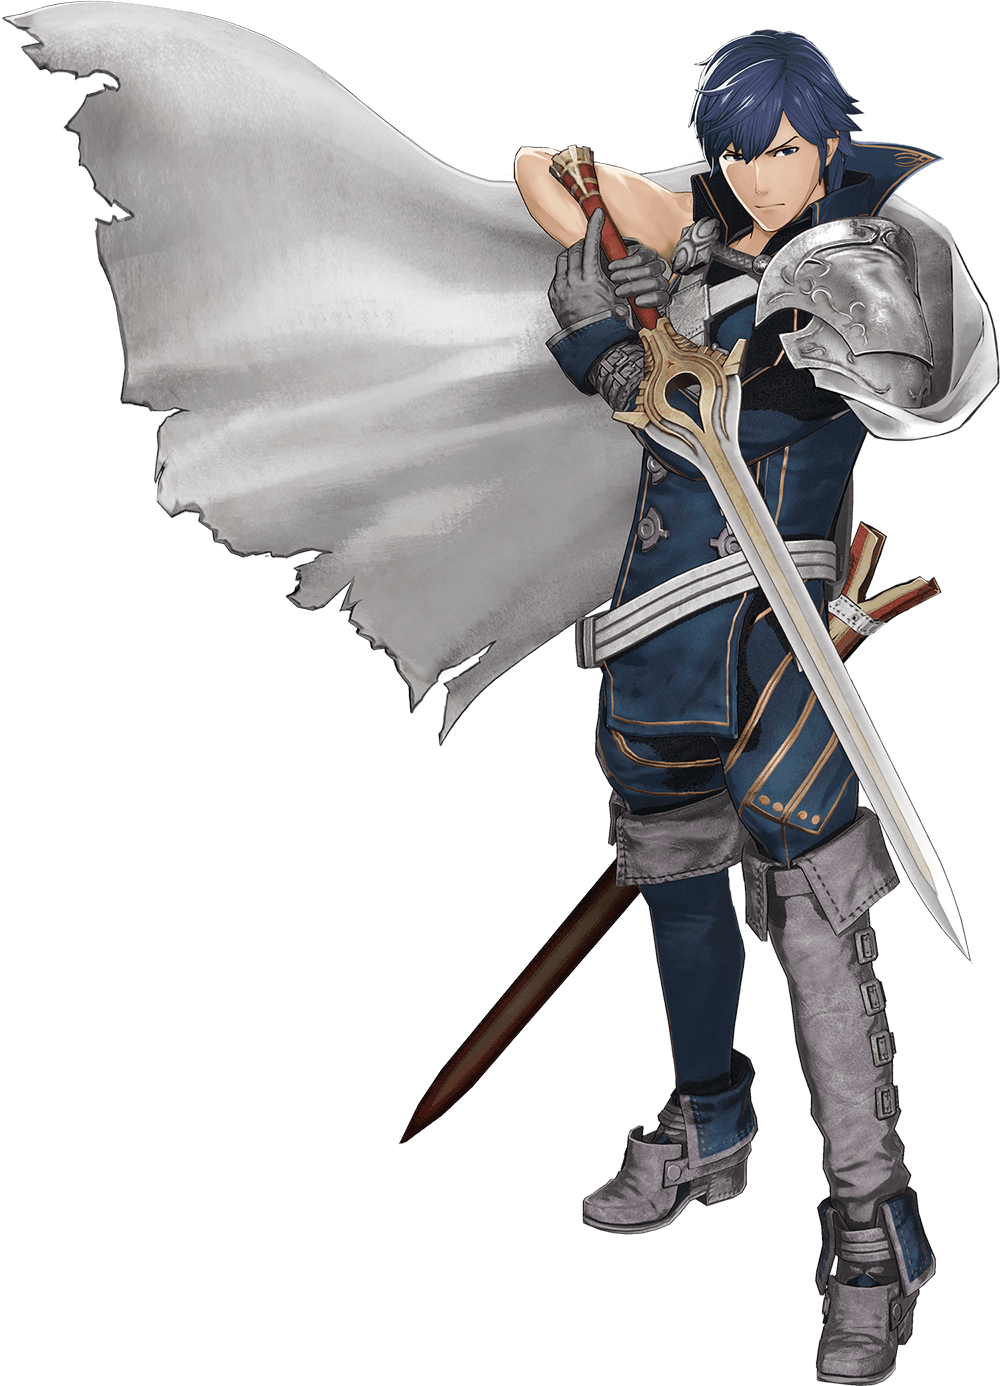 https://ssb.wiki.gallery/images/0/00/Chrom.png